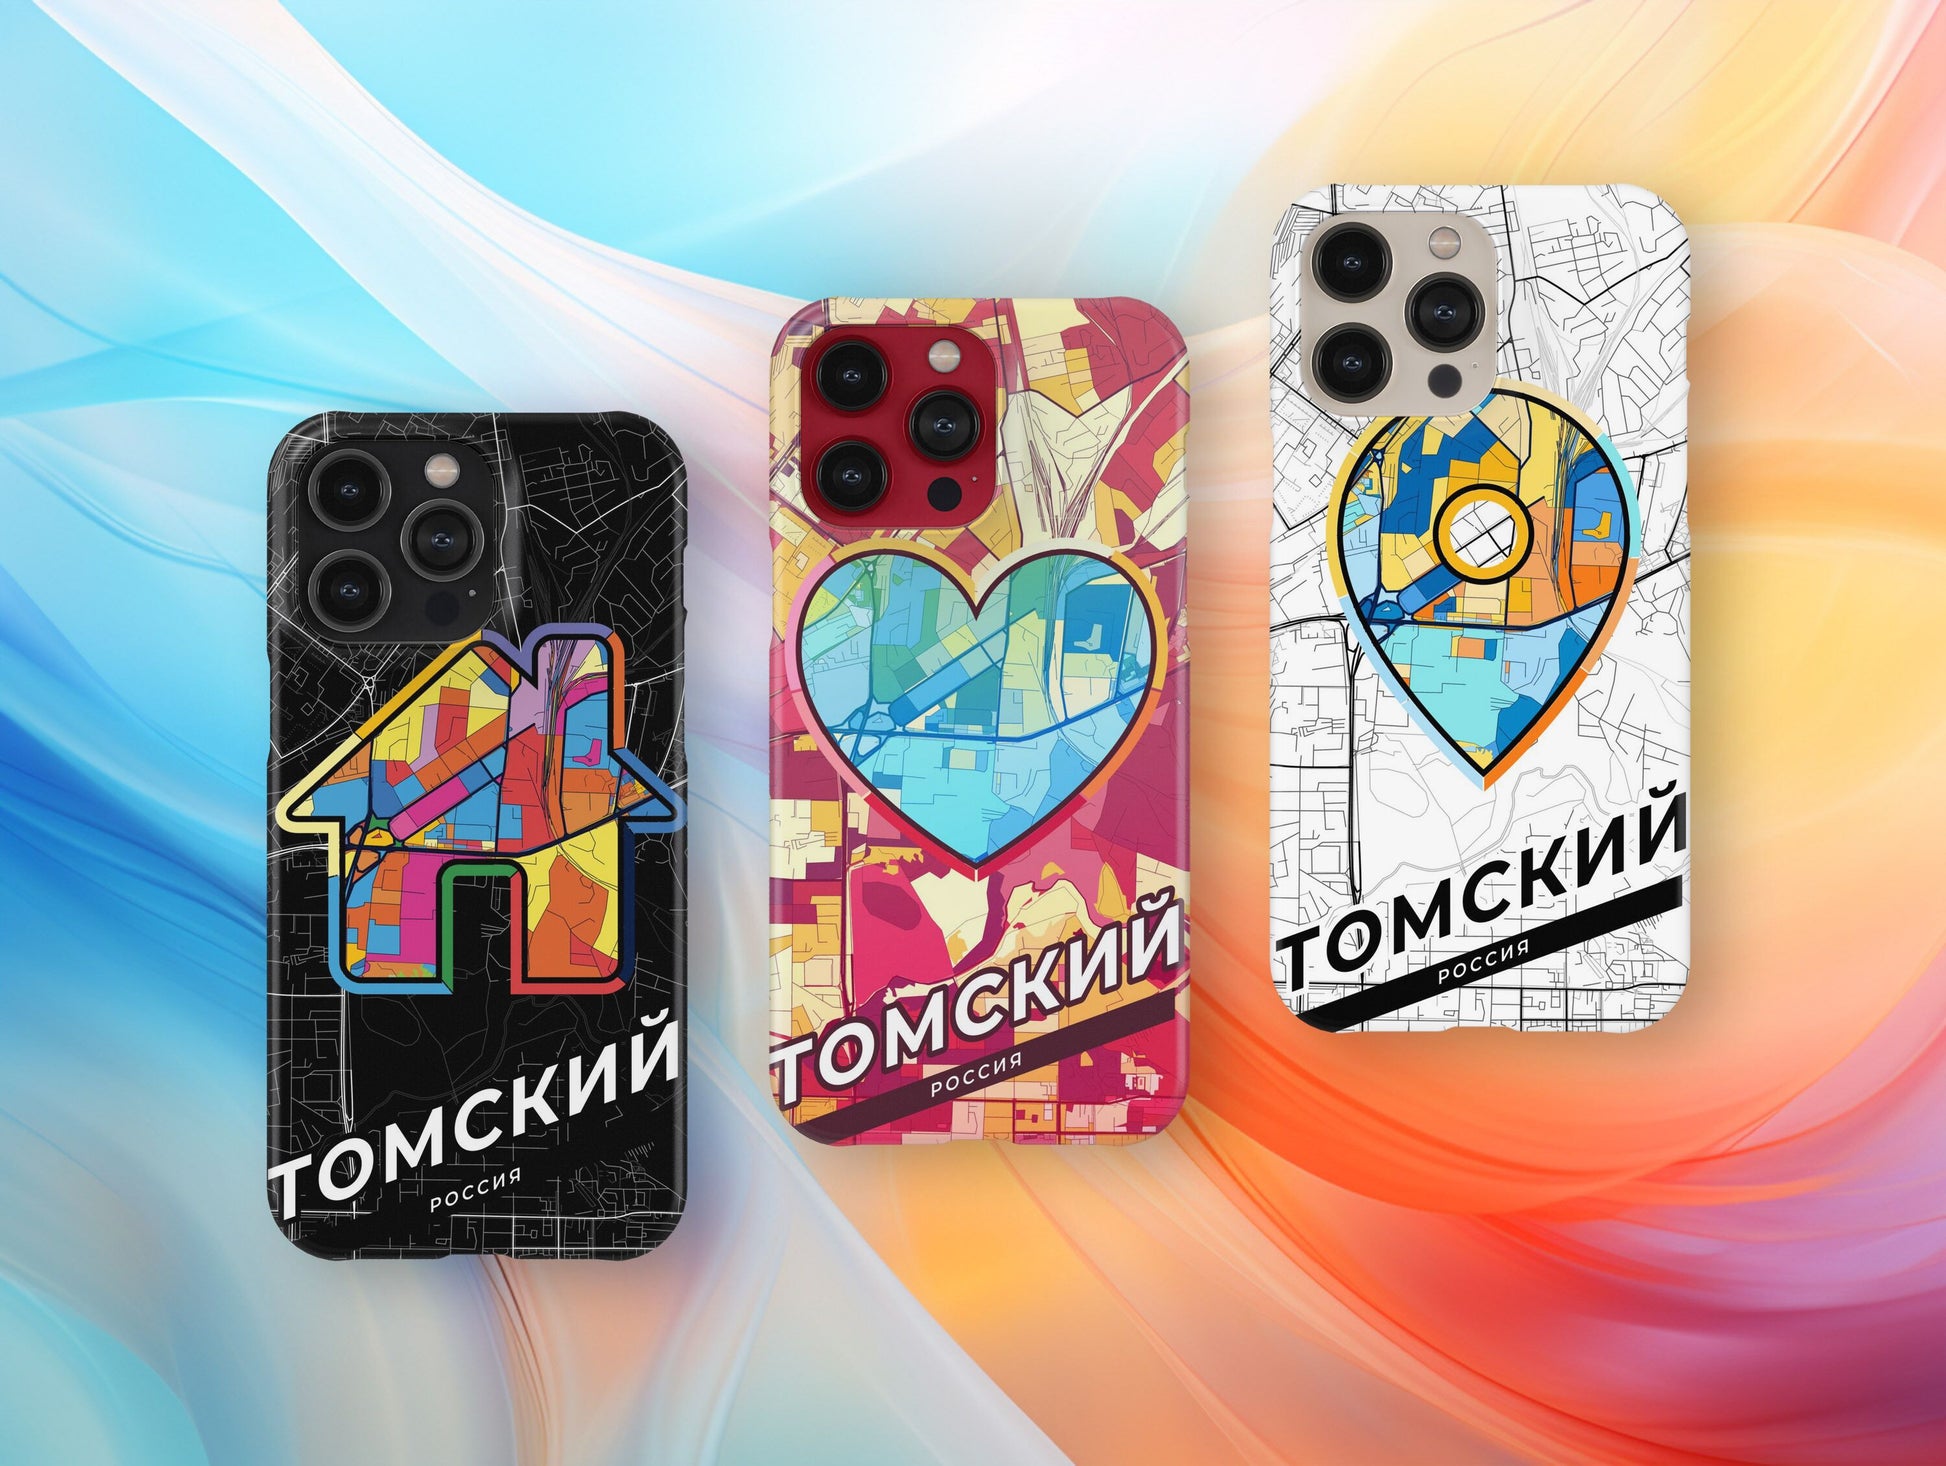 Tomsk Russia slim phone case with colorful icon